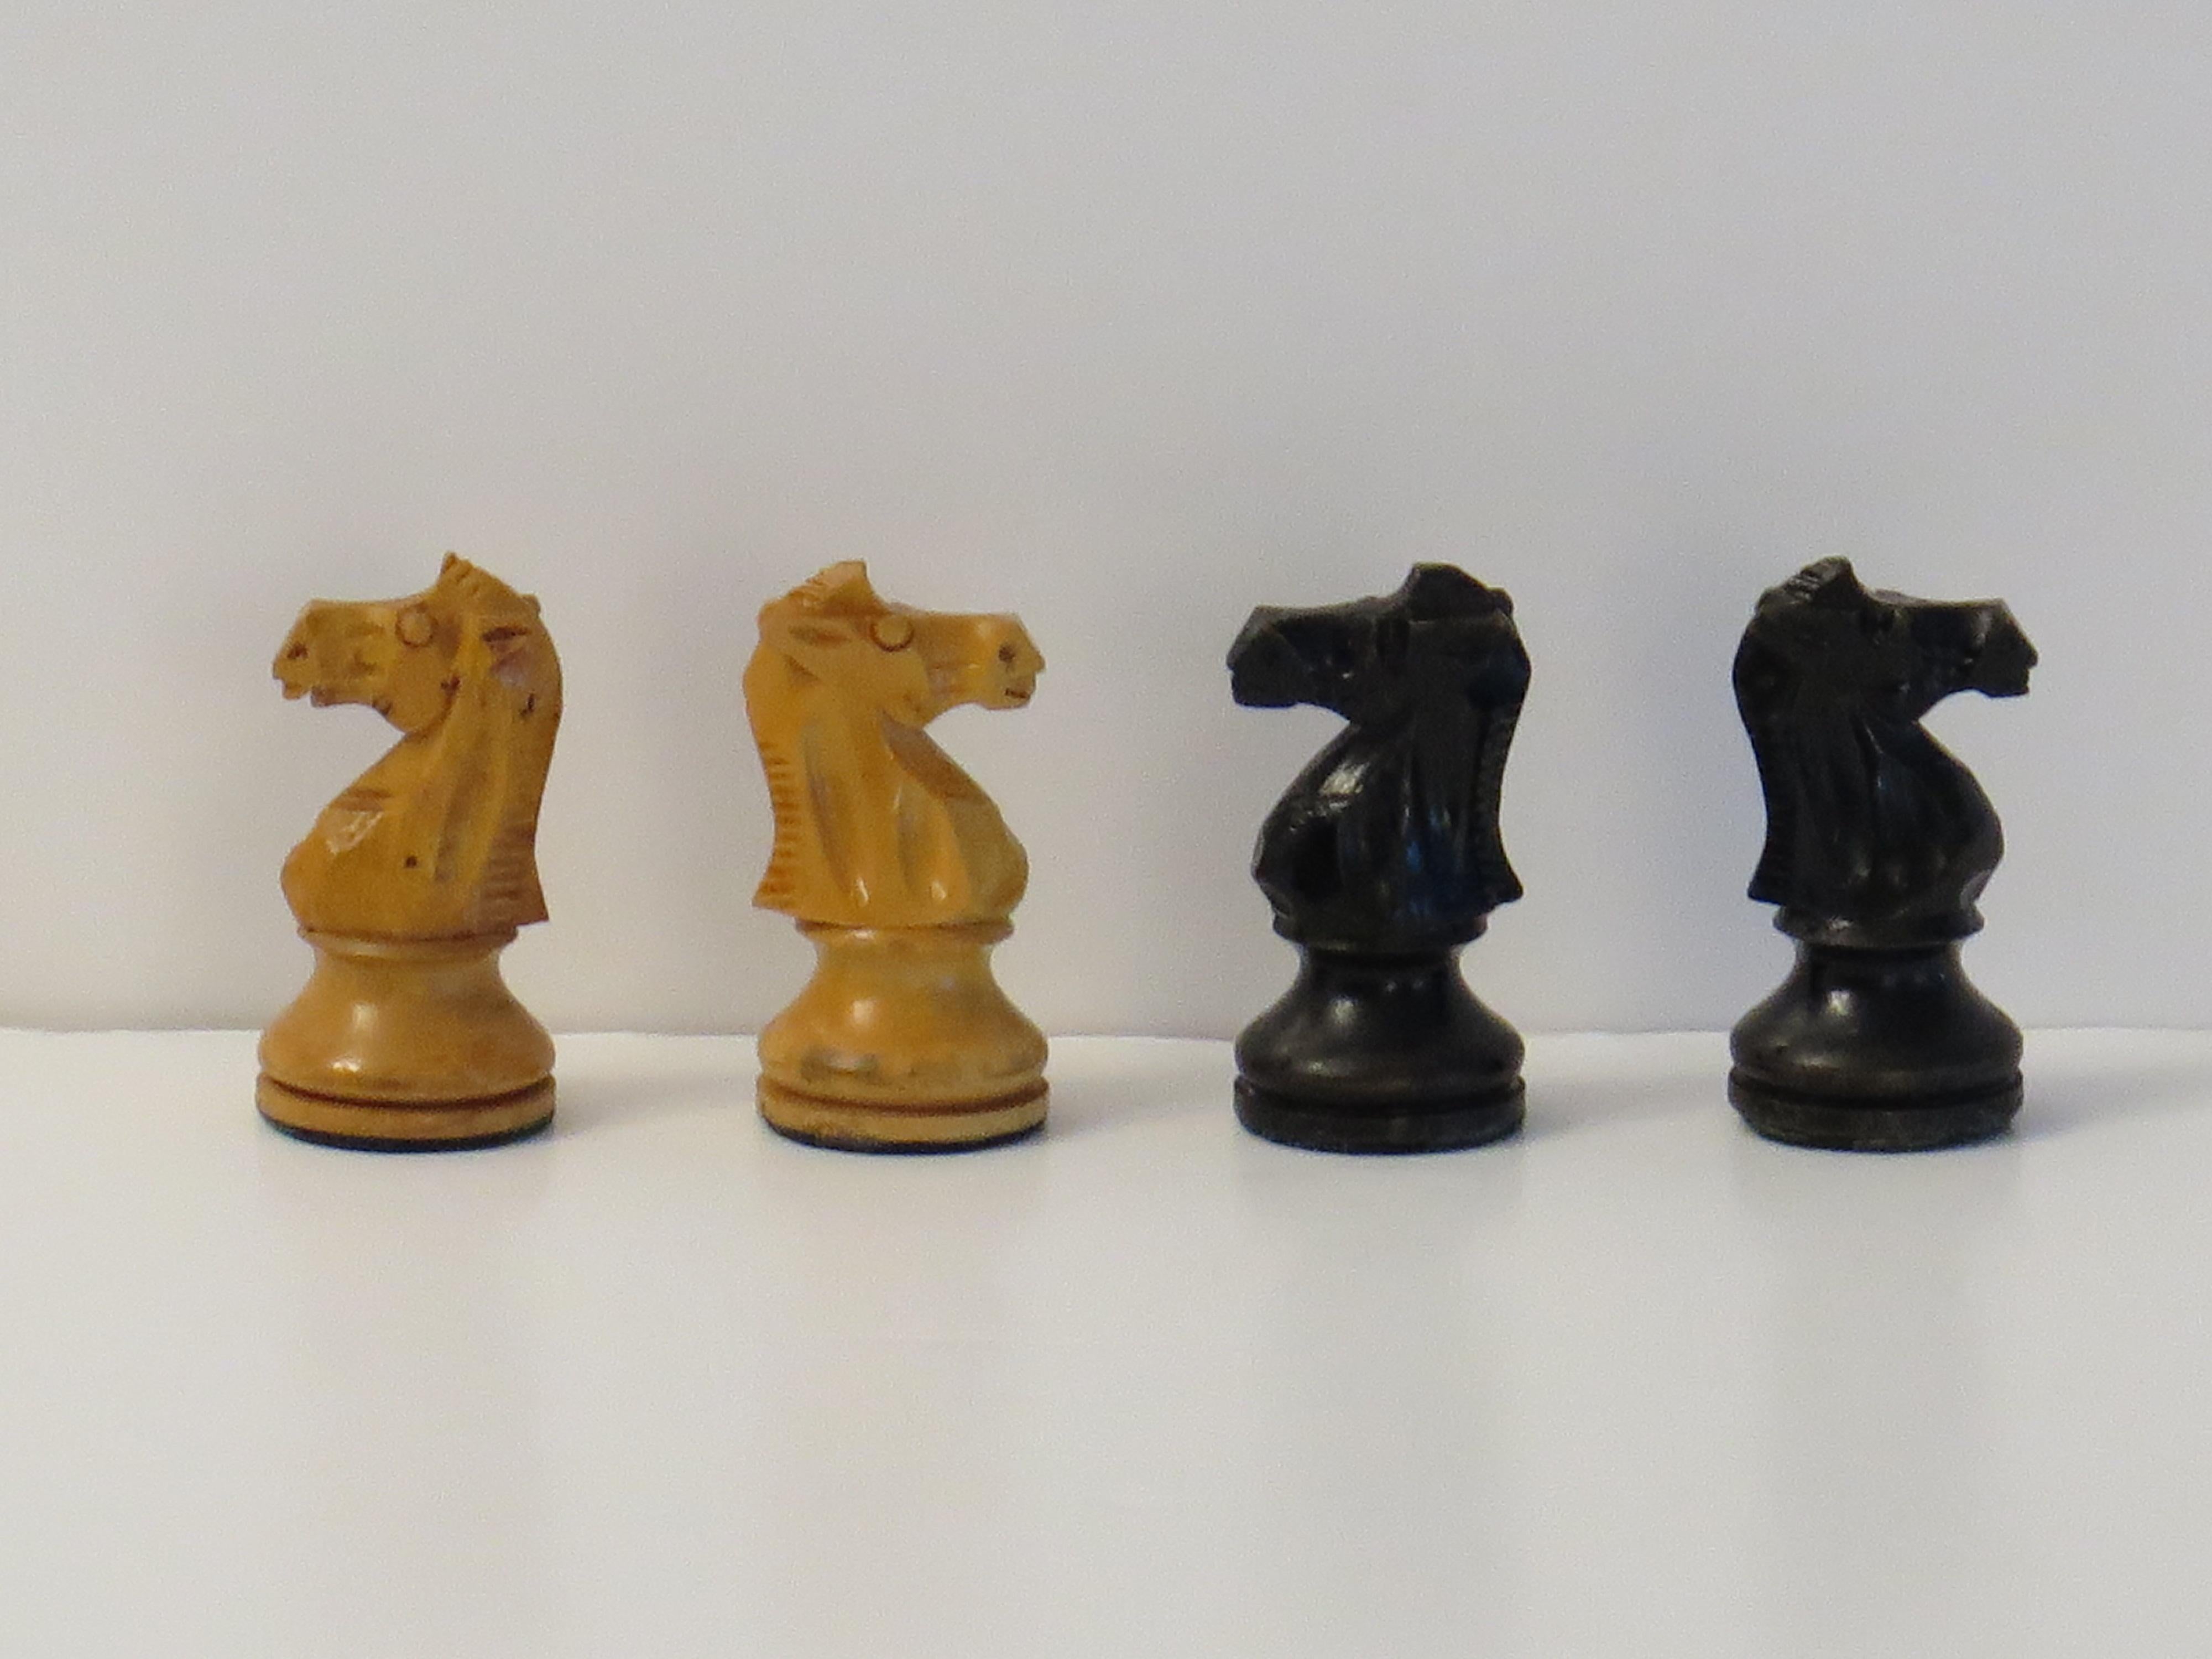 Staunton Fierce Knight Weighted Club Chesss Set 8.5cm Kings Jointed Box, 19th C en vente 3